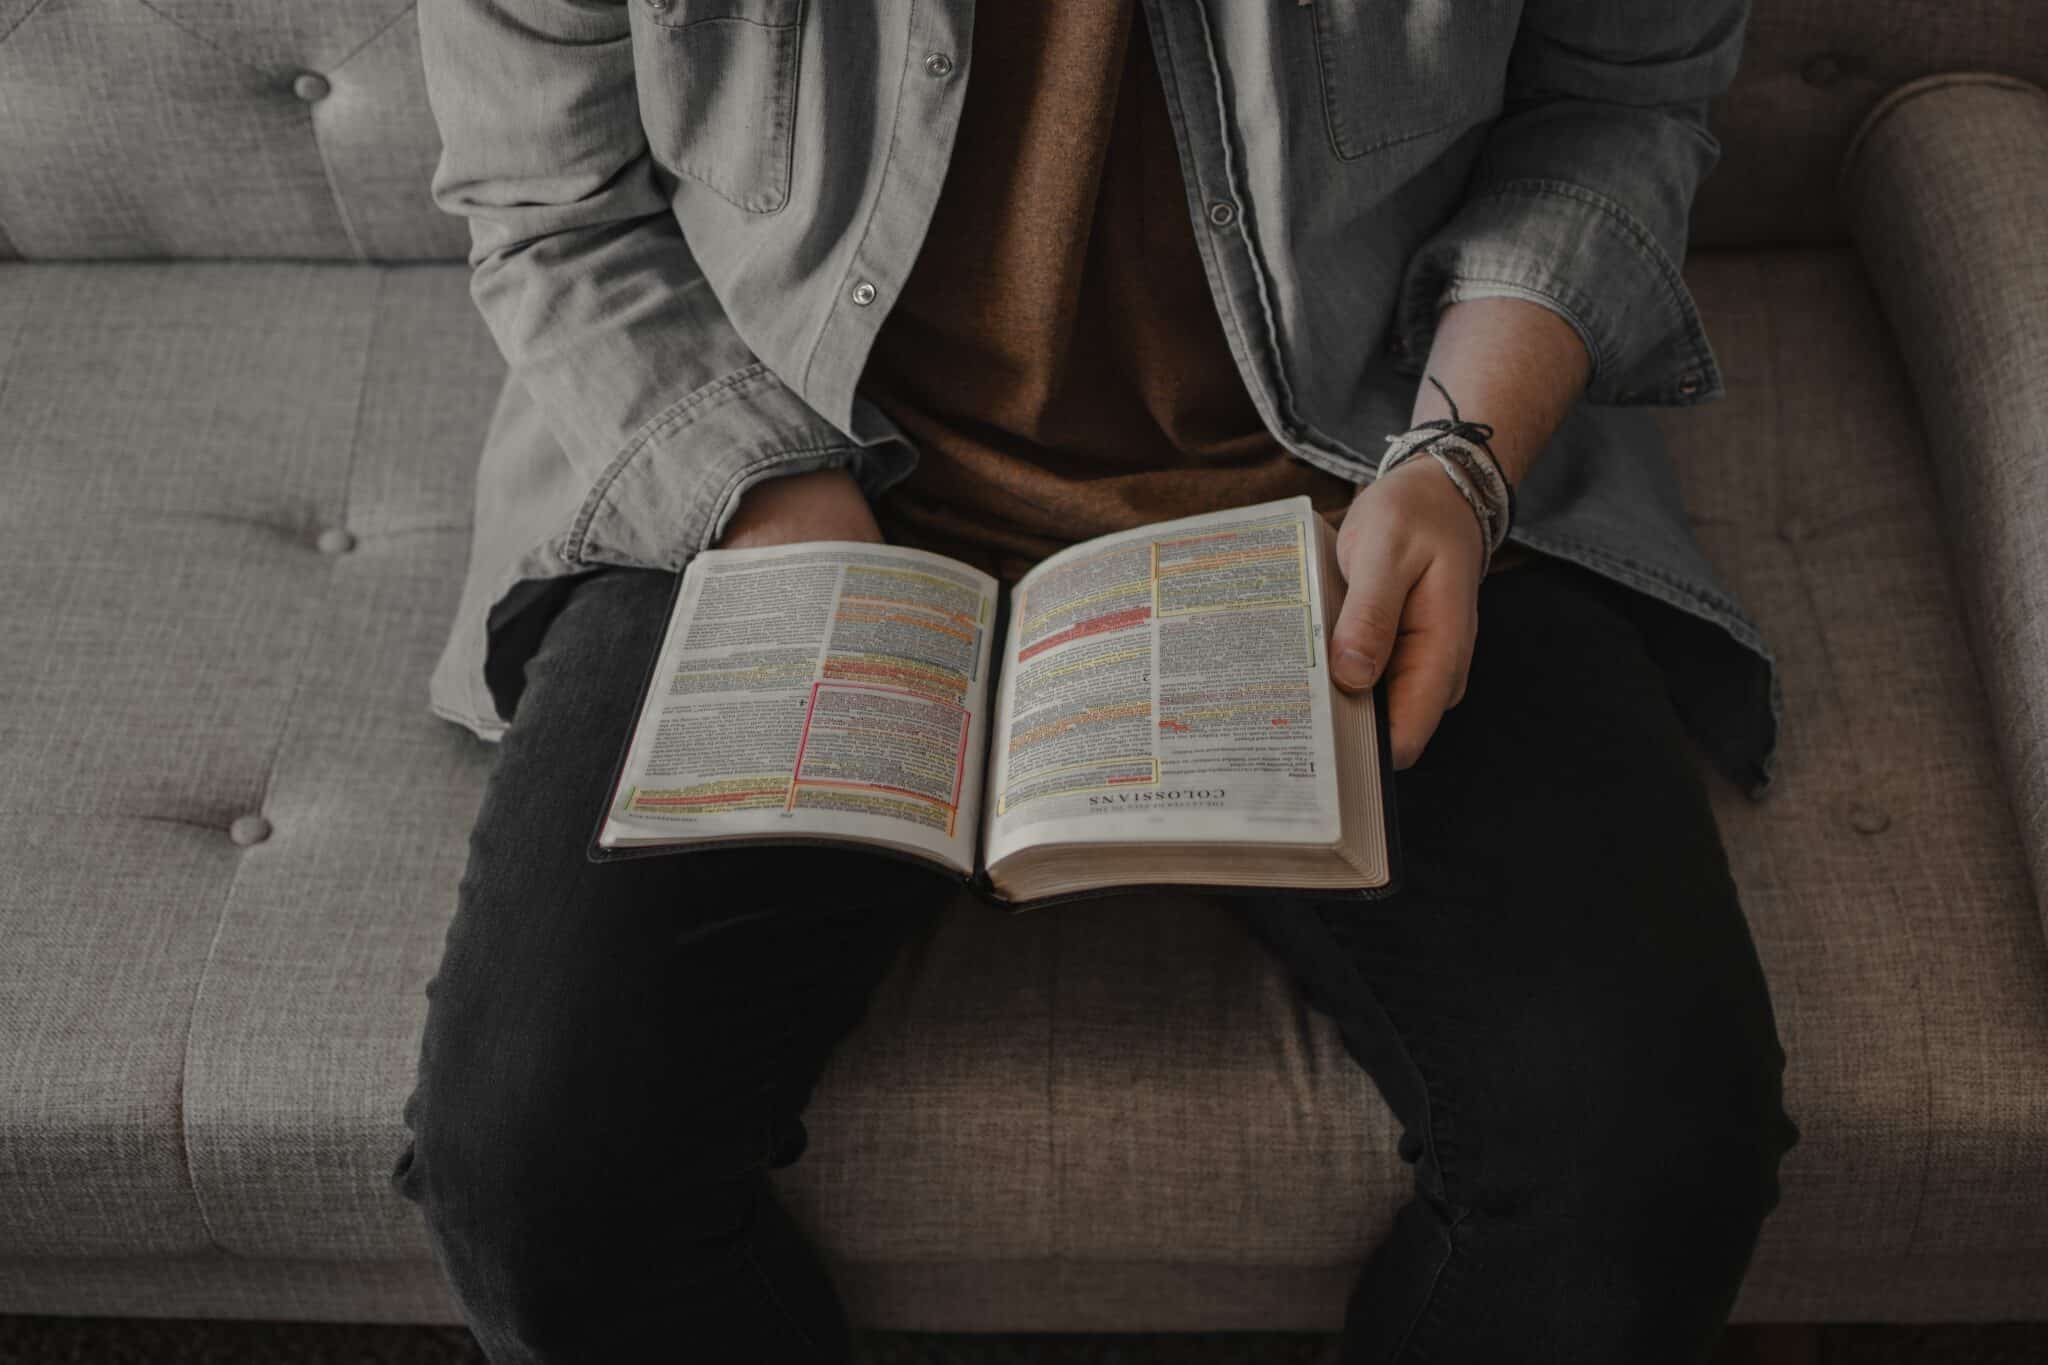 Man reading a bible | Photo by Aaron Owens on Unsplash